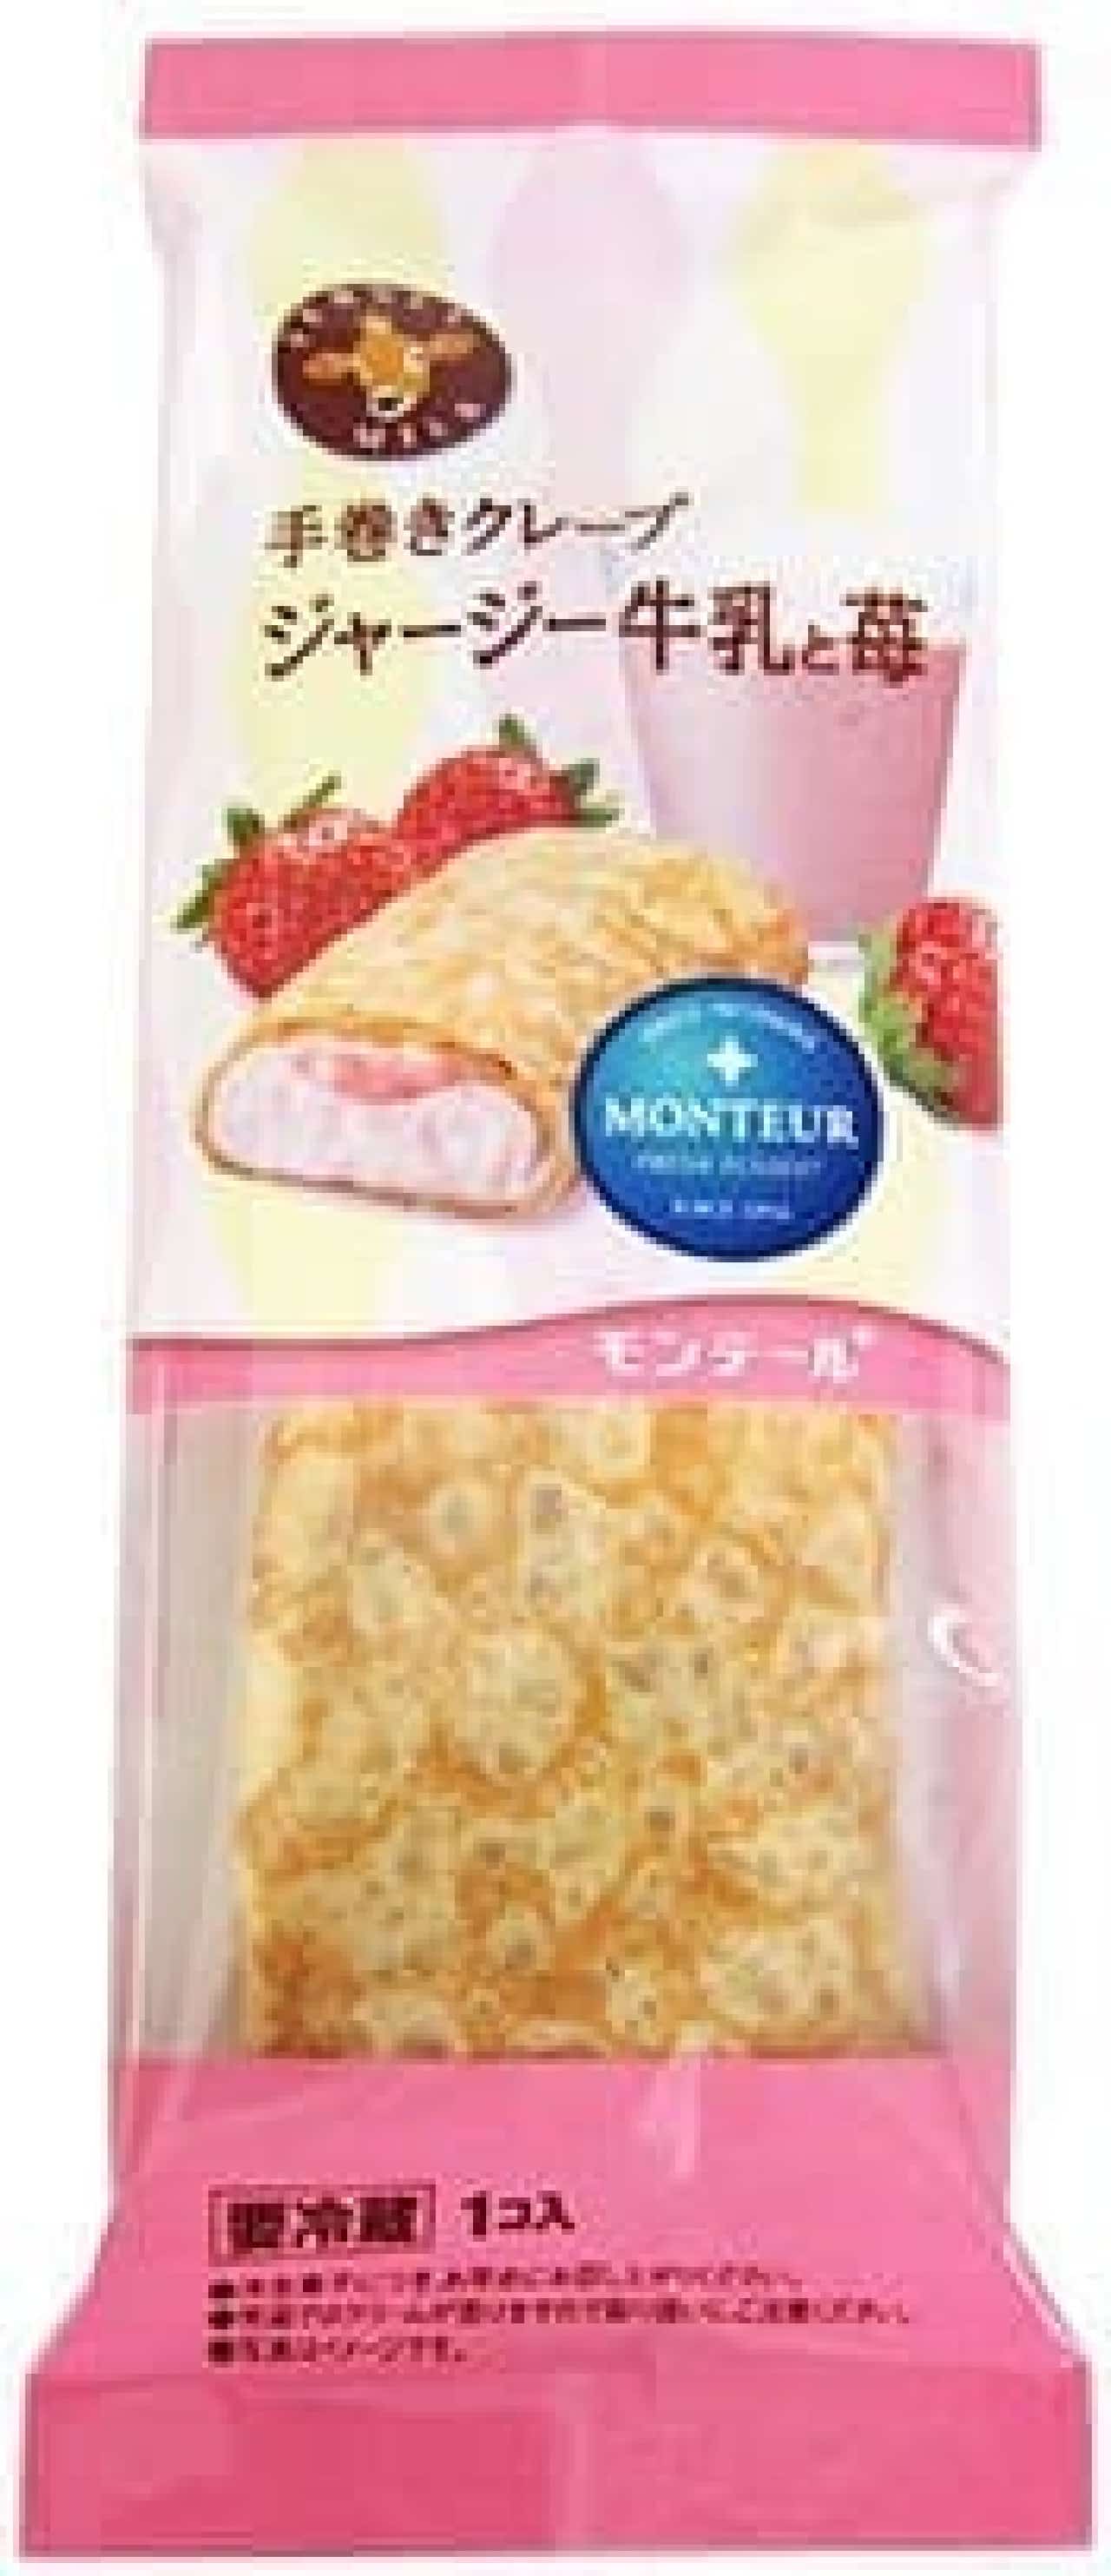 MONTEUR "Hand-rolled crepe jersey milk and strawberries"